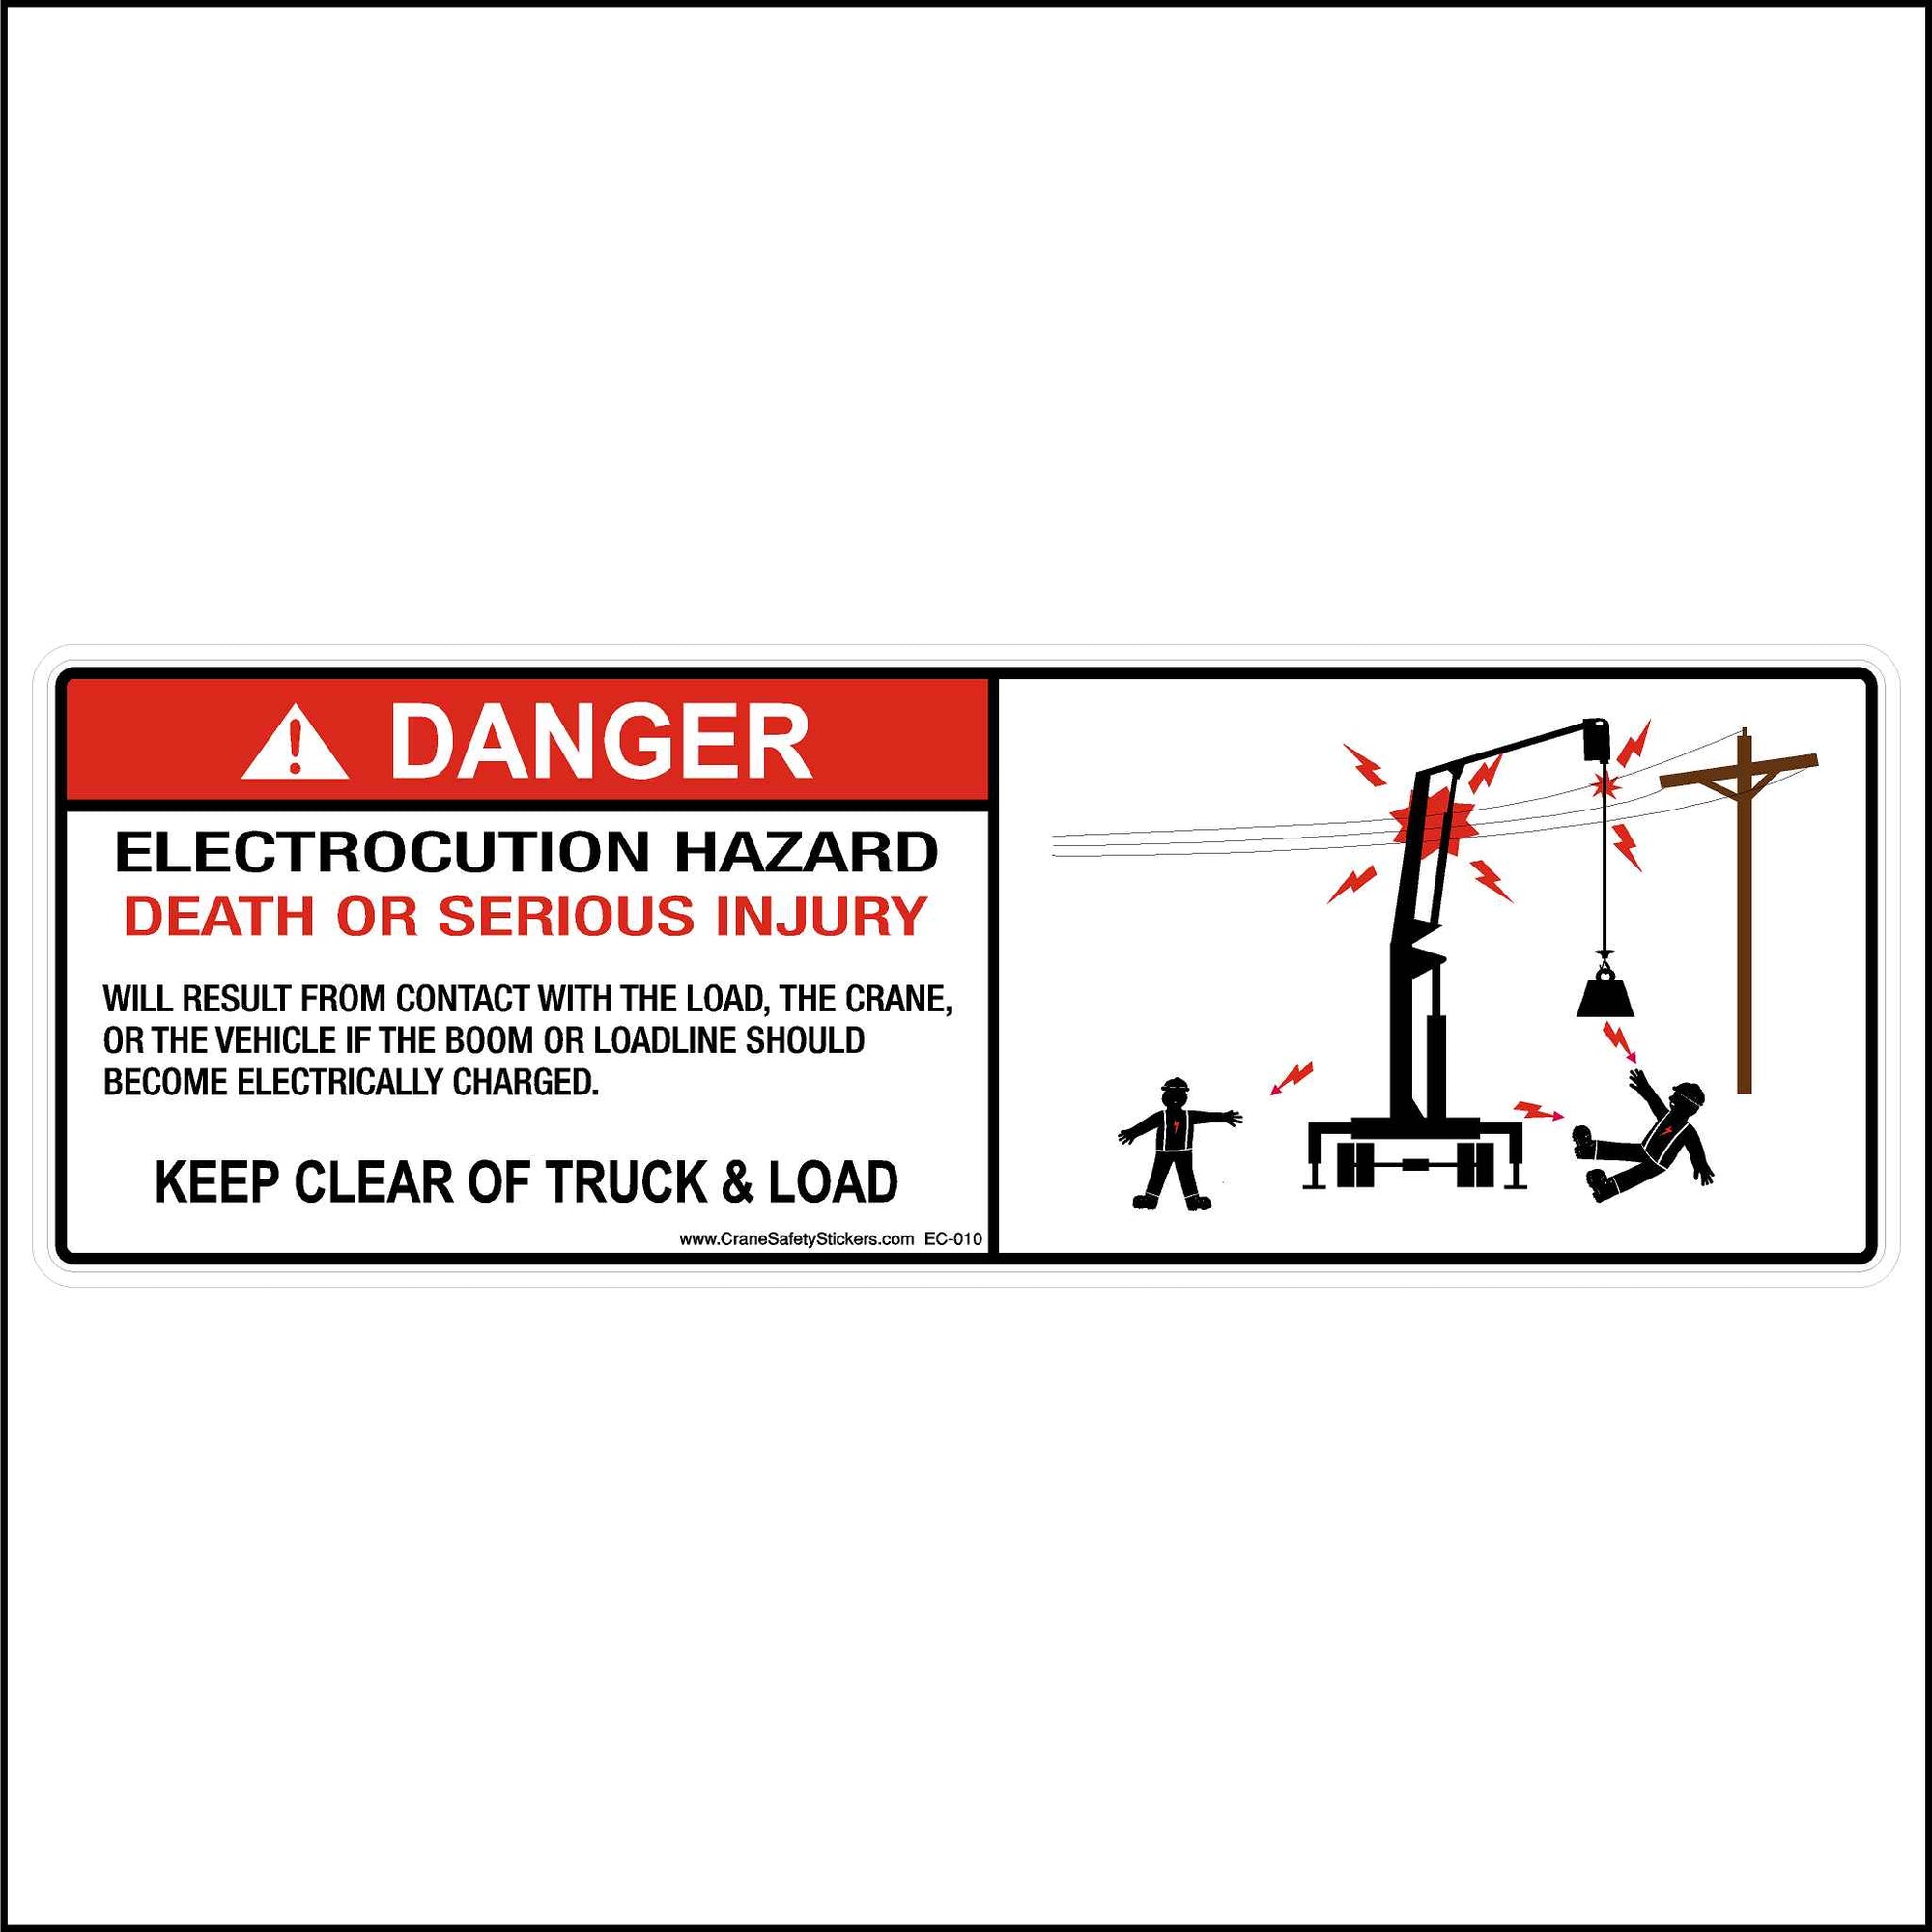 Keep Clear Of Truck And Load Sticker crane sticker 265100184 Printed with. DANGER. ELECTROCUTION HAZARD. DEATH OR SERIOUS INJURY WILL RESULT FROM CONTACT WITH THE LOAD, THE CRANE, OR THE VEHICLE IF THE BOOM OR LOADLINE SHOULD BECOME ELECTRICALLY CHARGED.